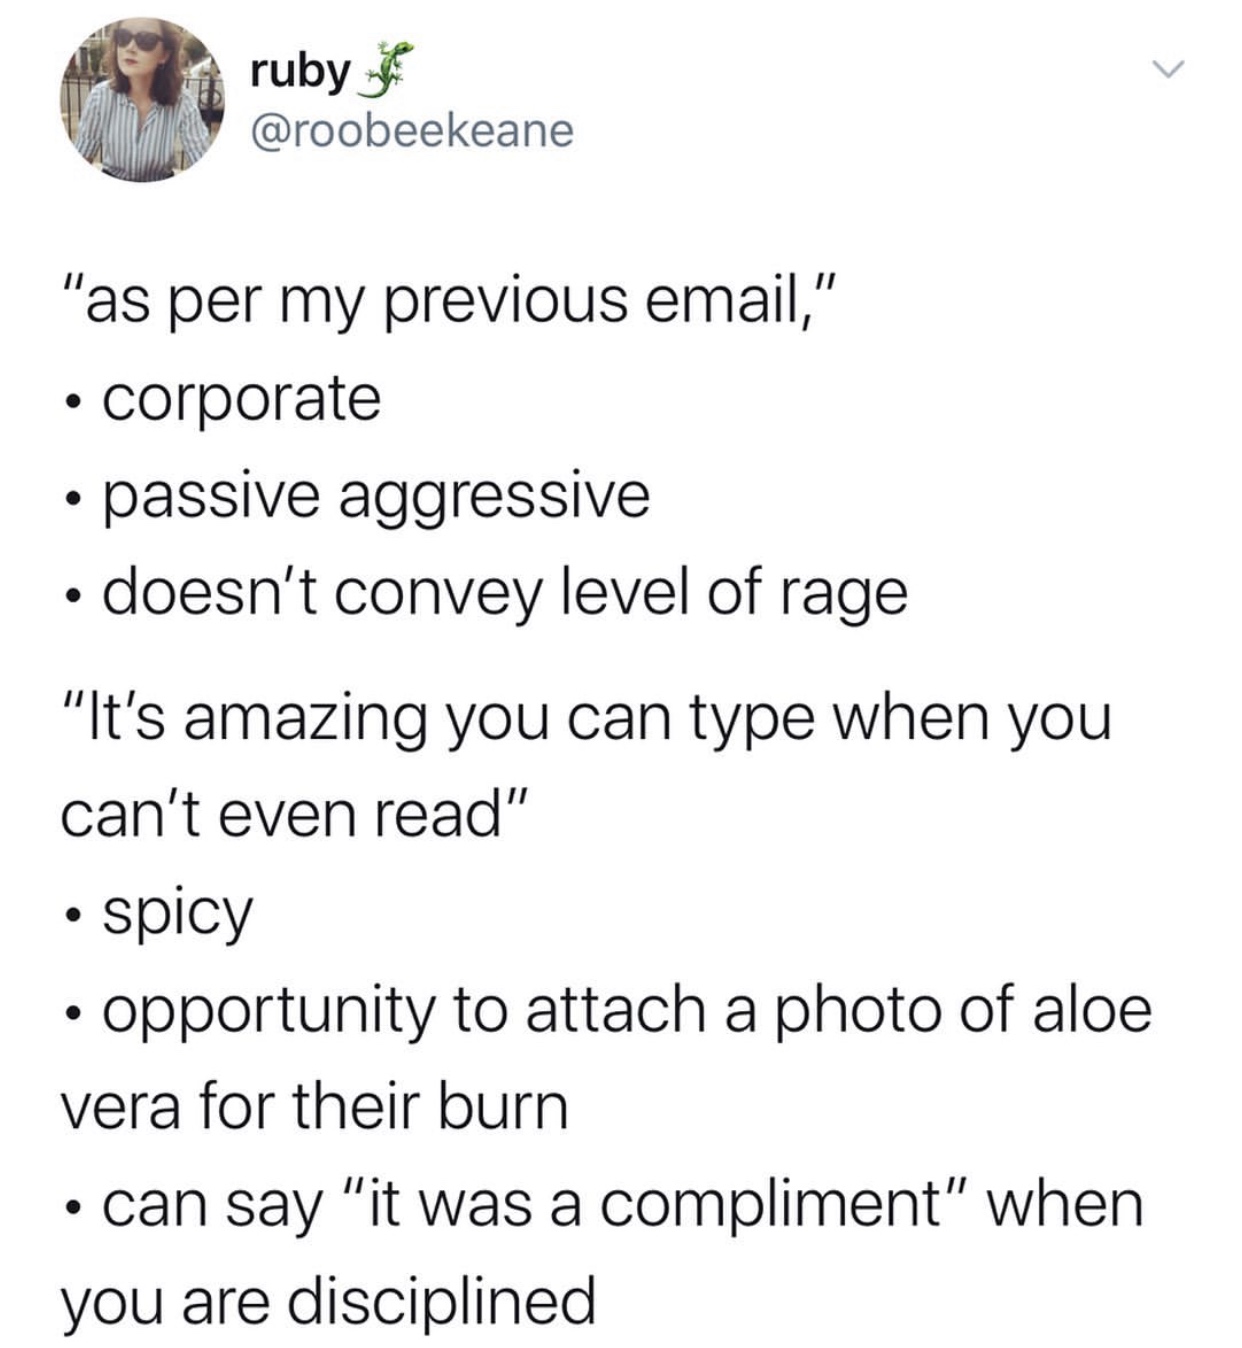 angle - ruby "as per my previous email," corporate passive aggressive doesn't convey level of rage "It's amazing you can type when you can't even read" spicy opportunity to attach a photo of aloe vera for their burn can say "it was a compliment" when you 